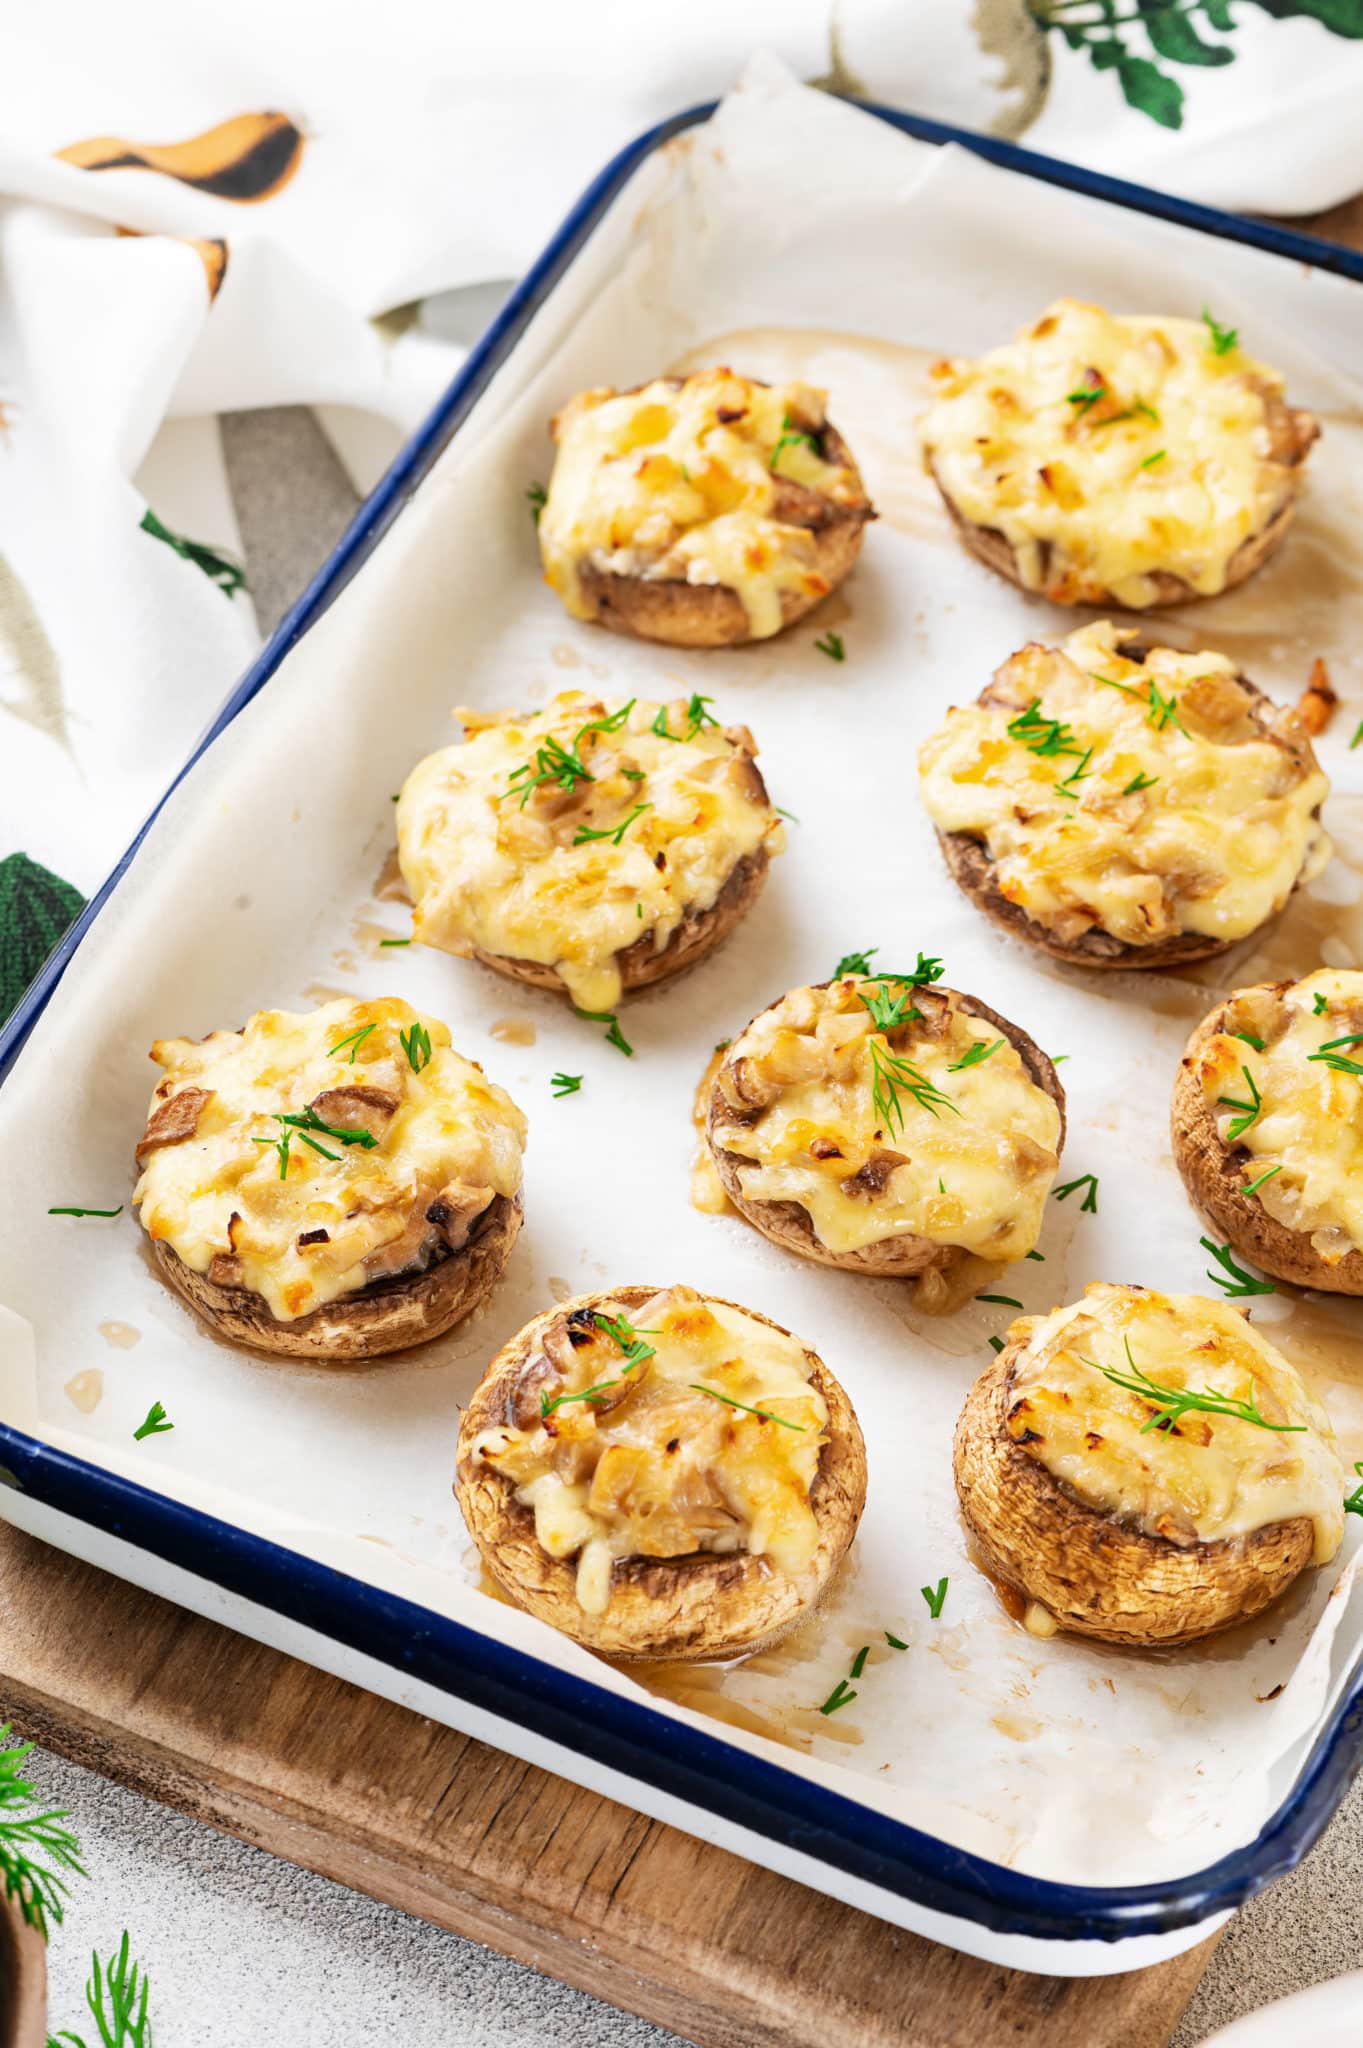 Baked Stuffed Mushrooms with Cheese